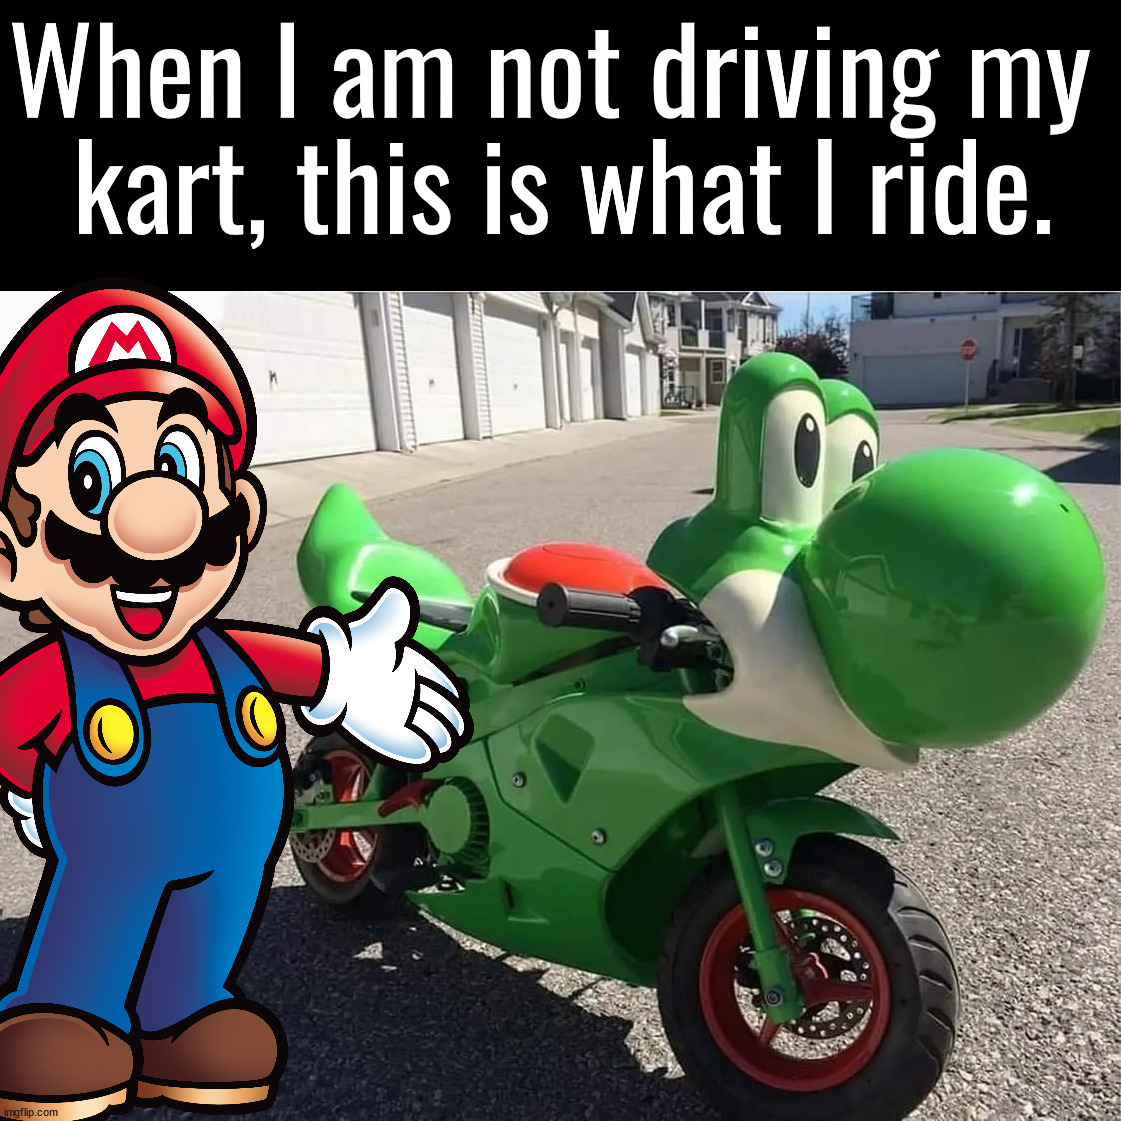 When Mario is not driving his Kart | When I am not driving my 
kart, this is what I ride. | image tagged in mario,yoshi,bike,ride,mario kart,motorbike | made w/ Imgflip meme maker